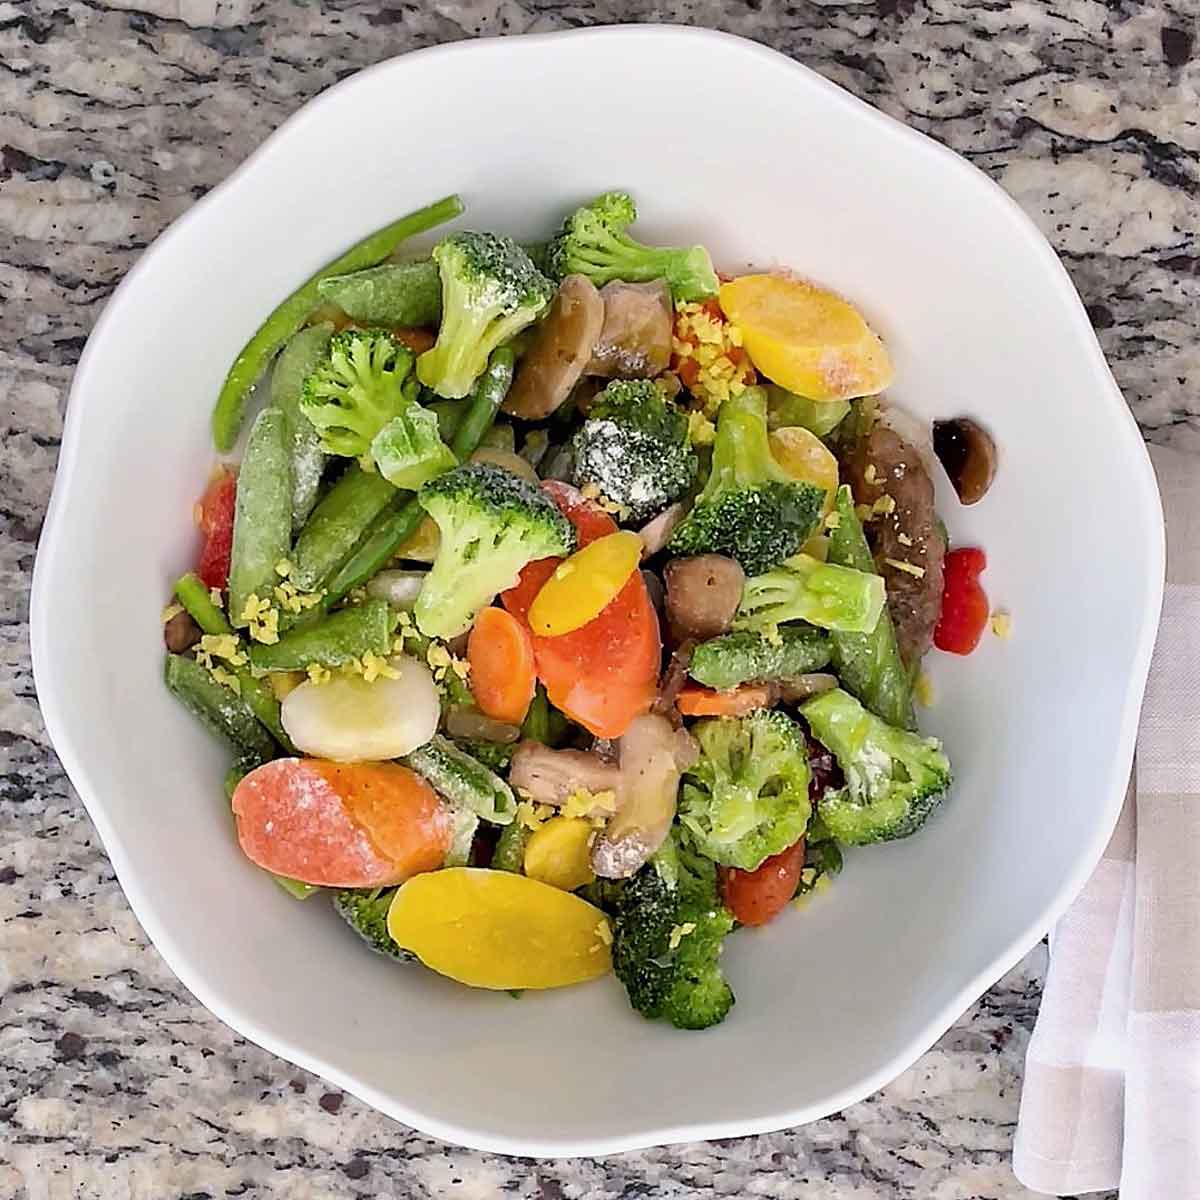 Seaoned raw mix veg in a bowl.